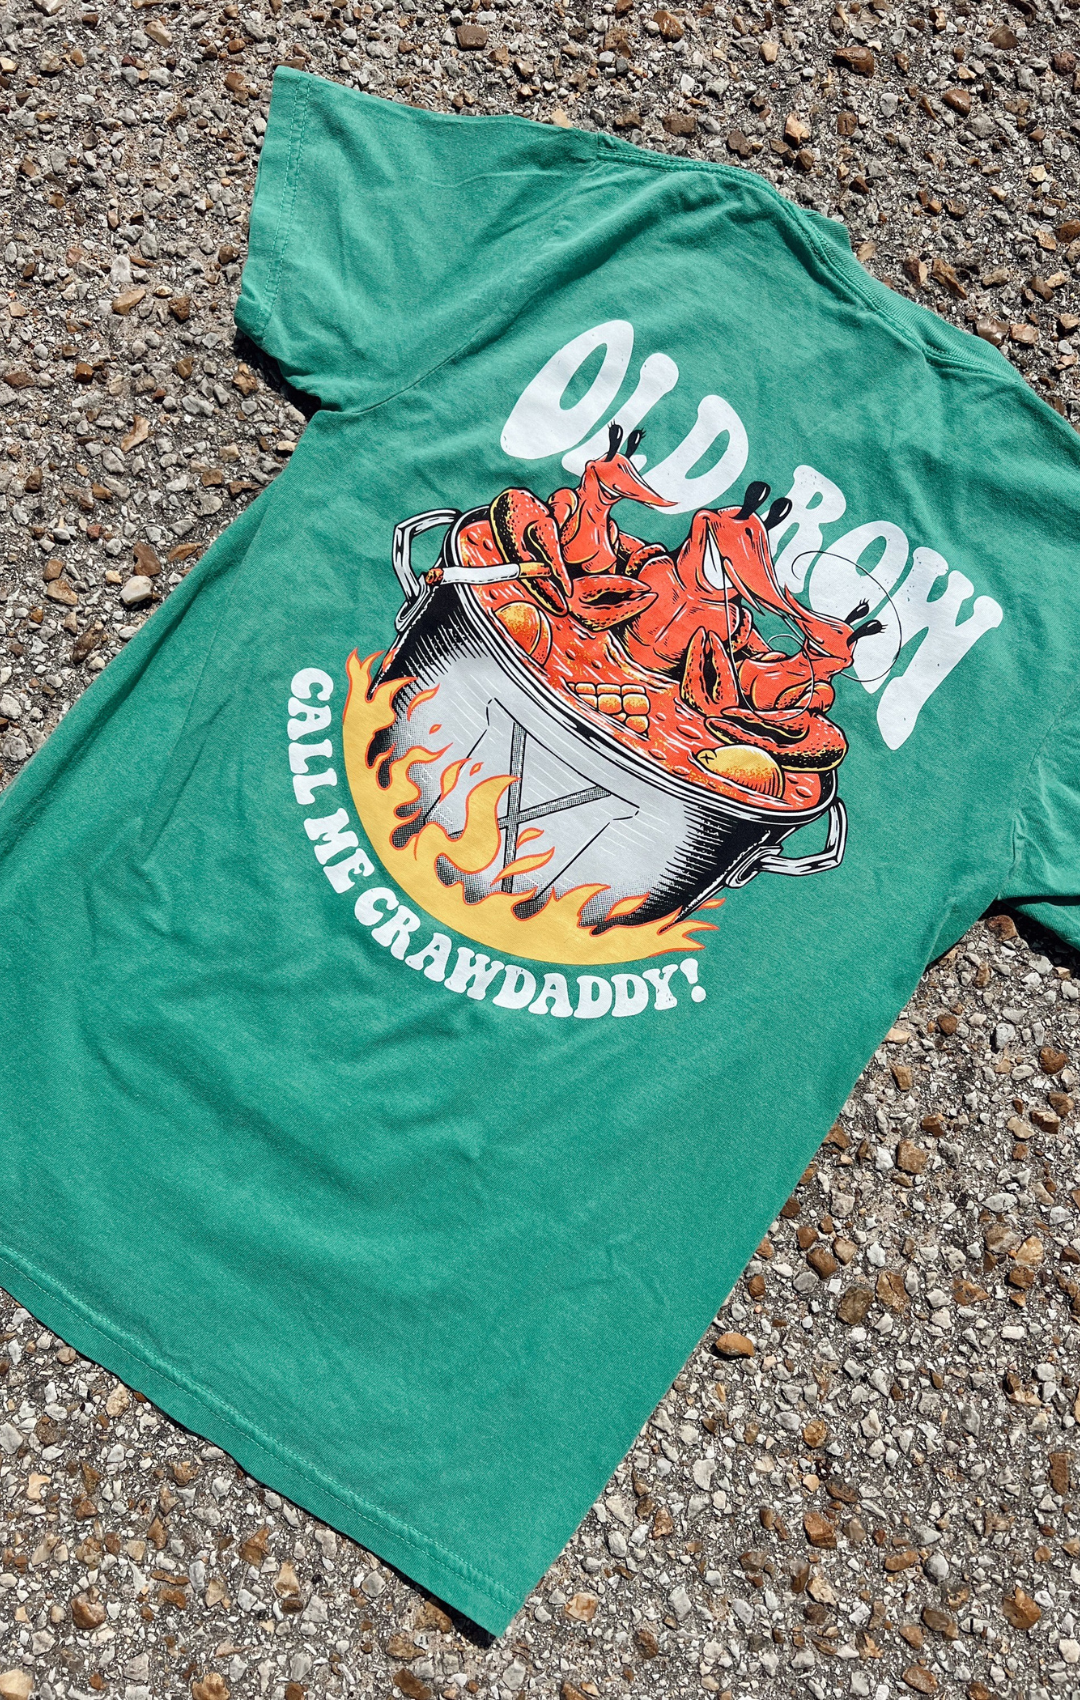 The Crawdaddy Pocket Tee by Old Row